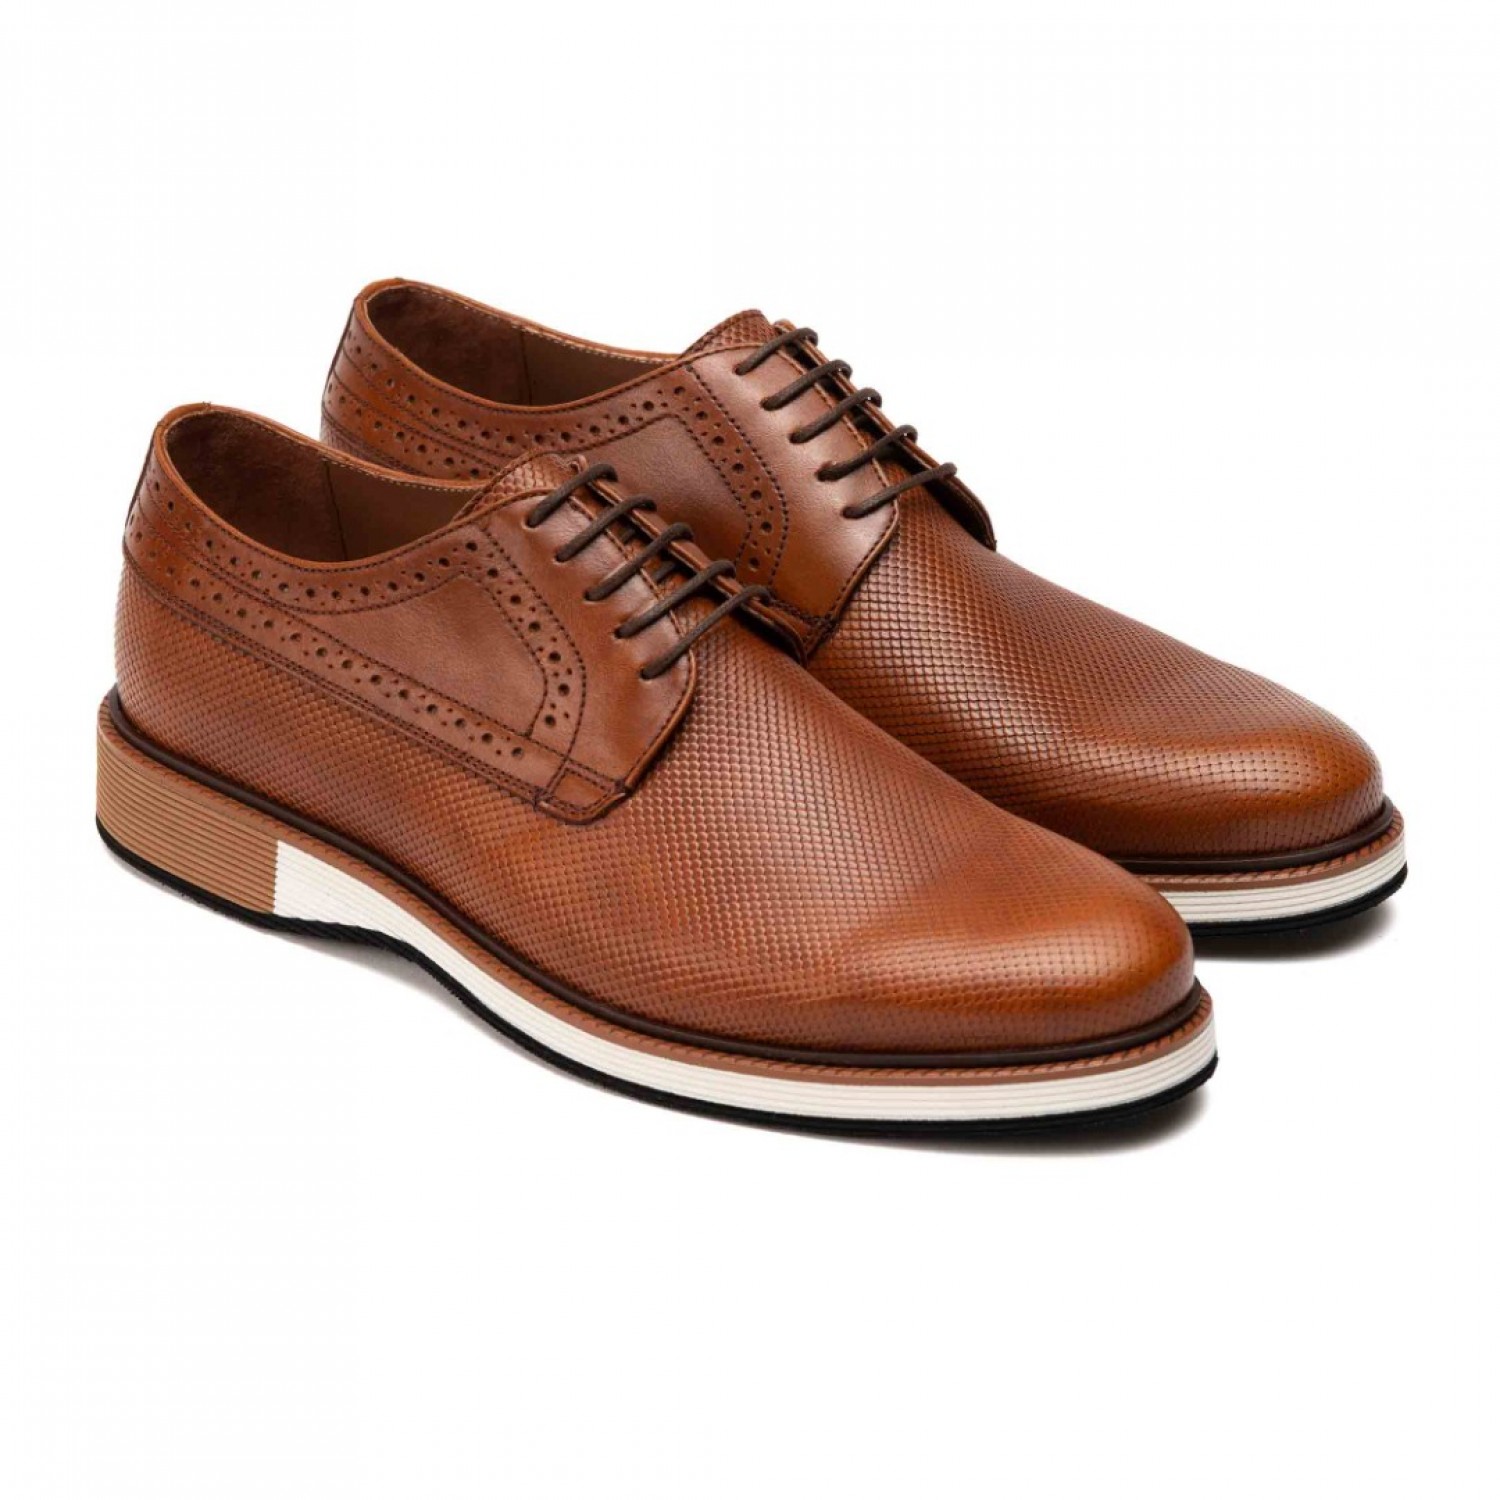 SPLIT LEATHER SHOES IN CONTRAST SOLE